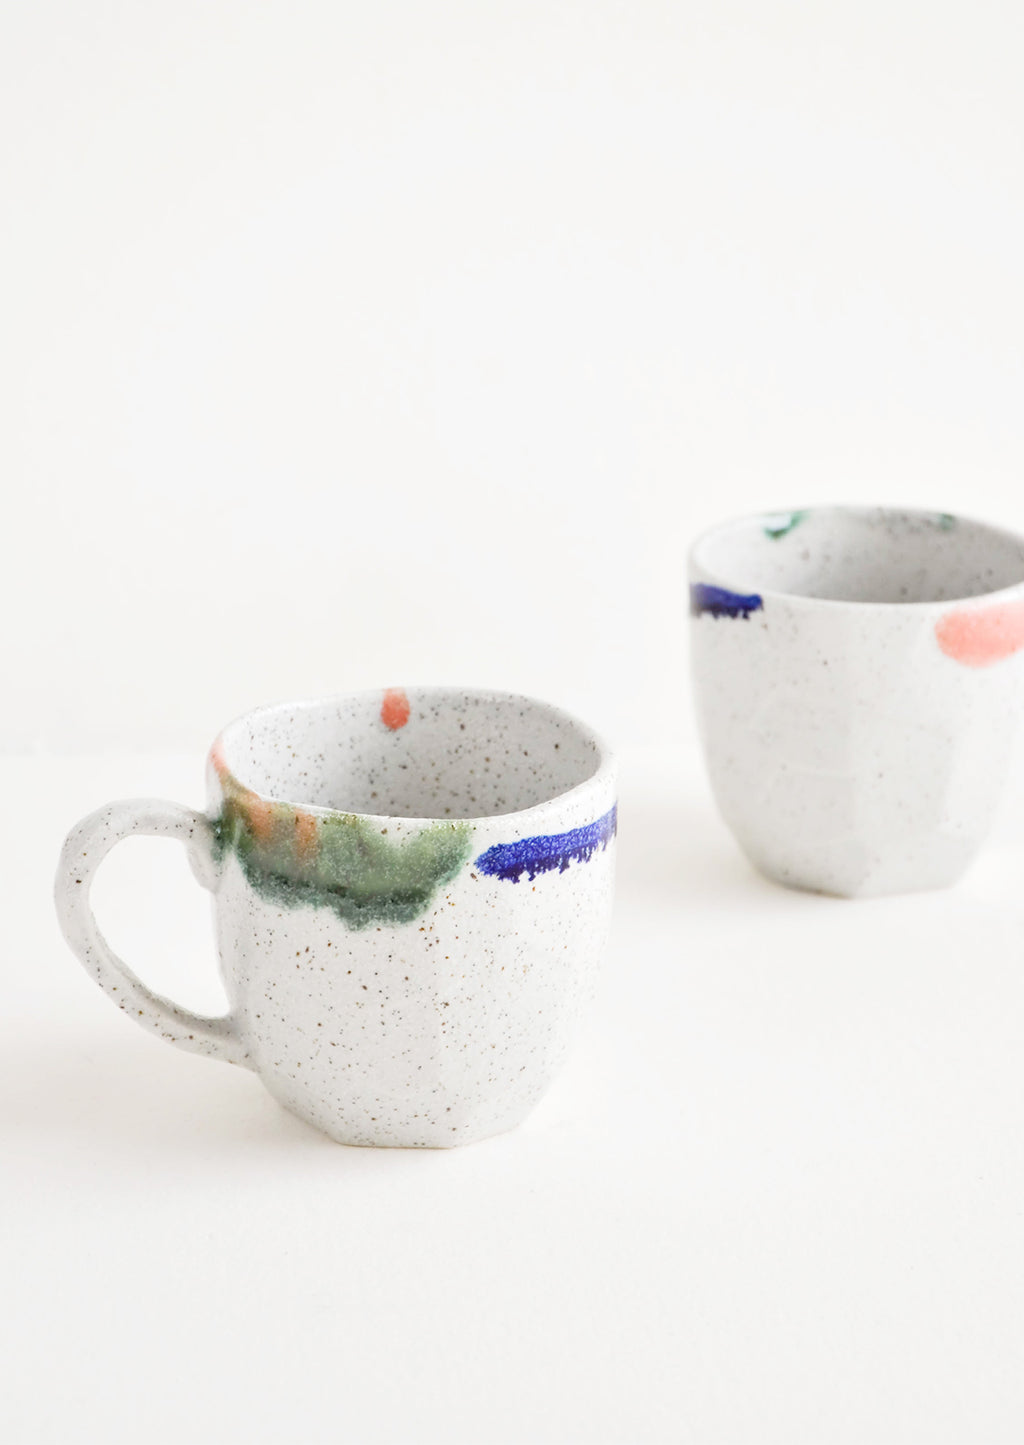 3: Two short gray ceramic mugs with blue, green, and pink painted rims.